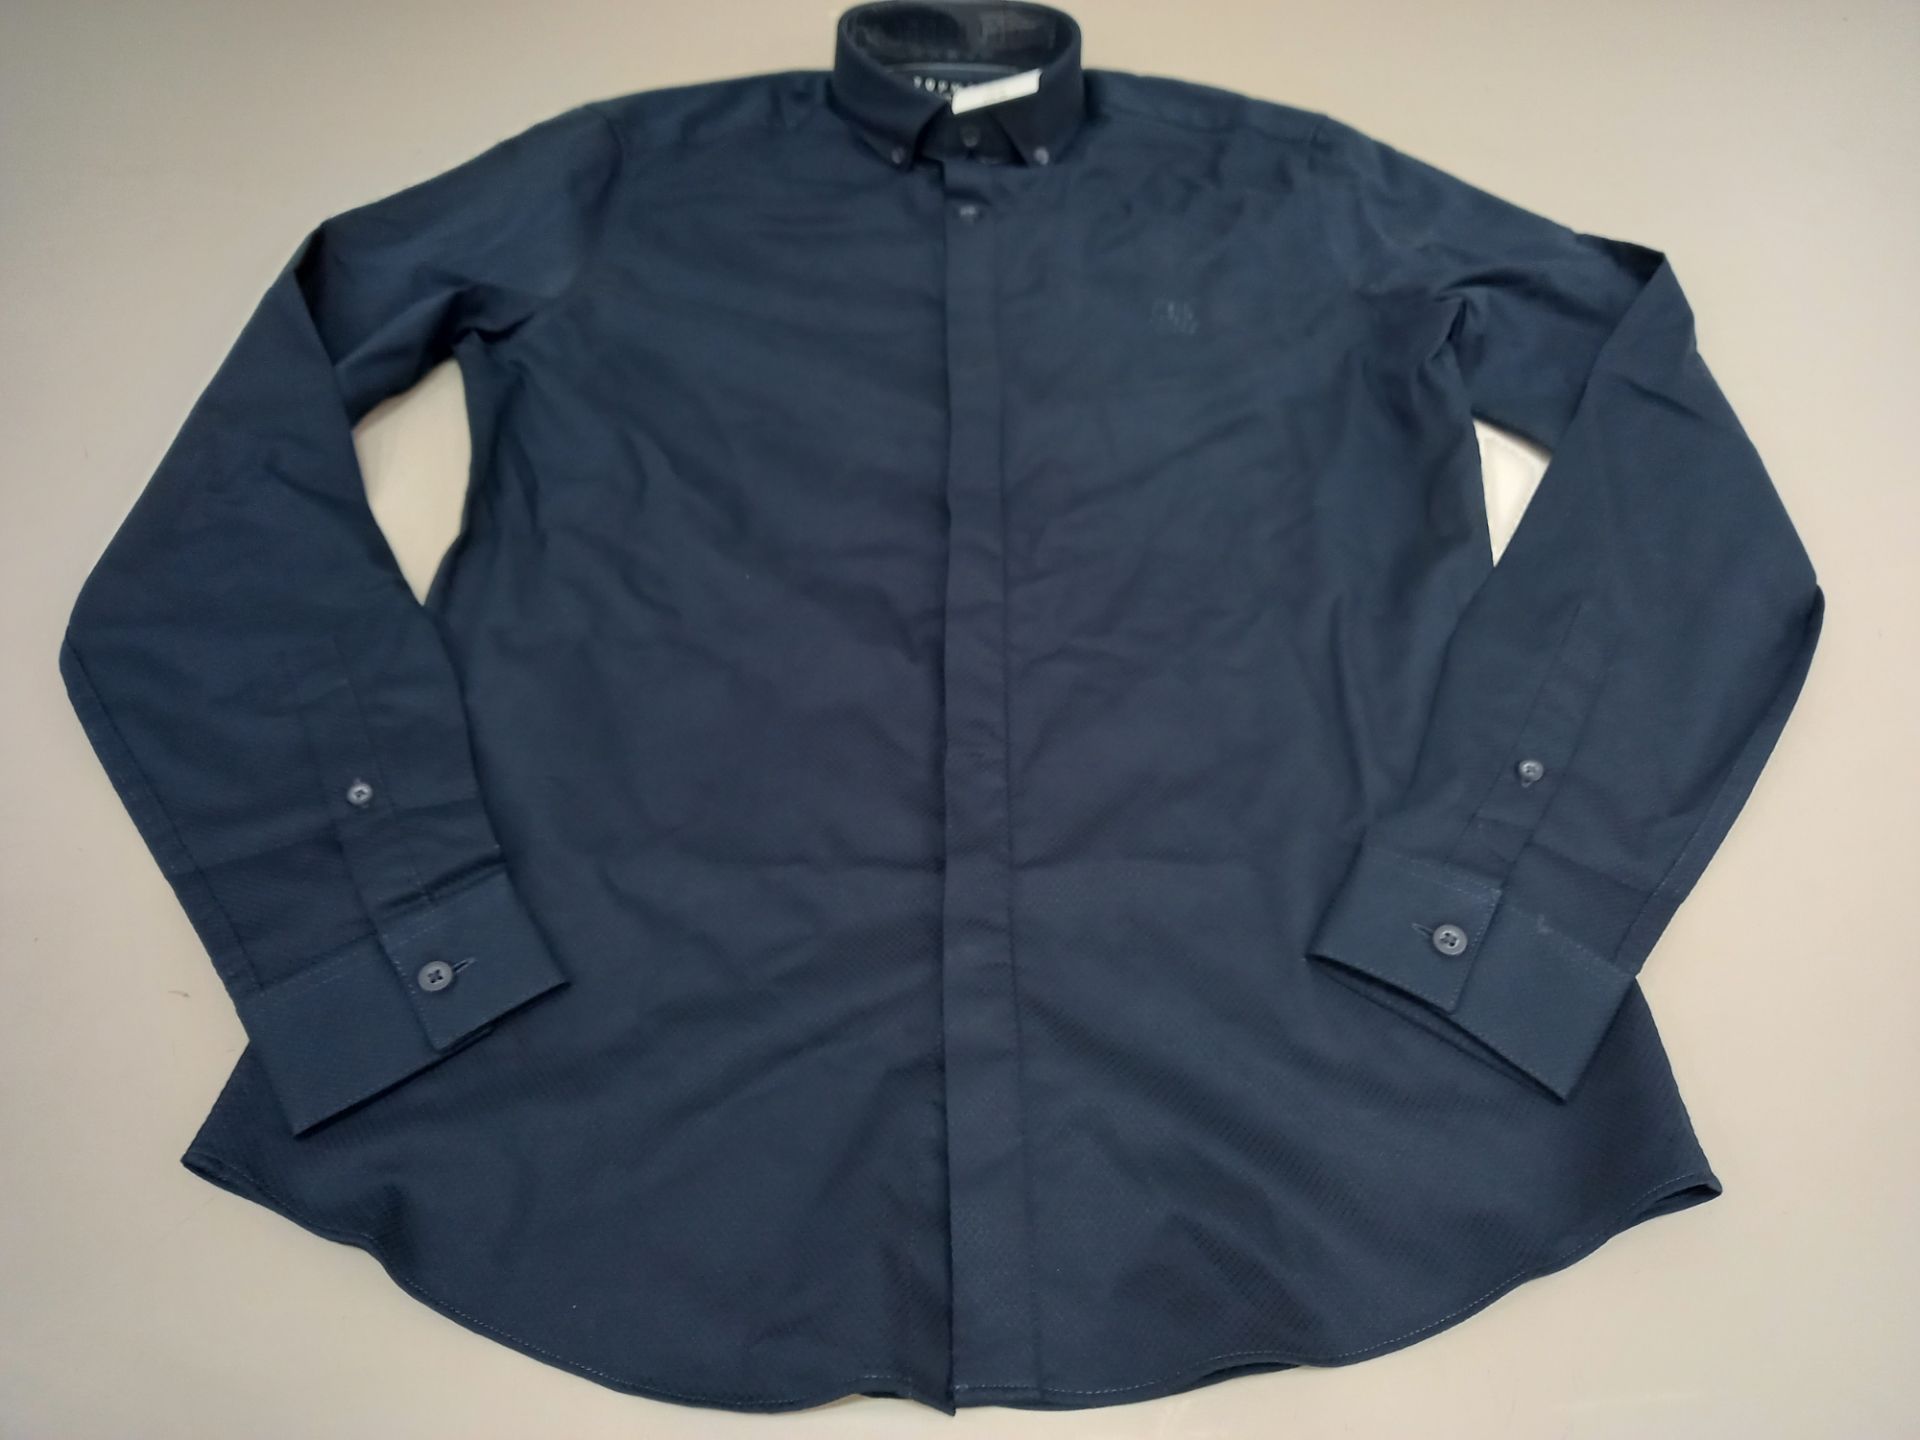 17 X BRAND NEW TOPMAN SLIM FIT NAVY BUTTONED COLLARED SHIRTS SIZE XS RRP £30.00 (TOTAL RRP £510.00)